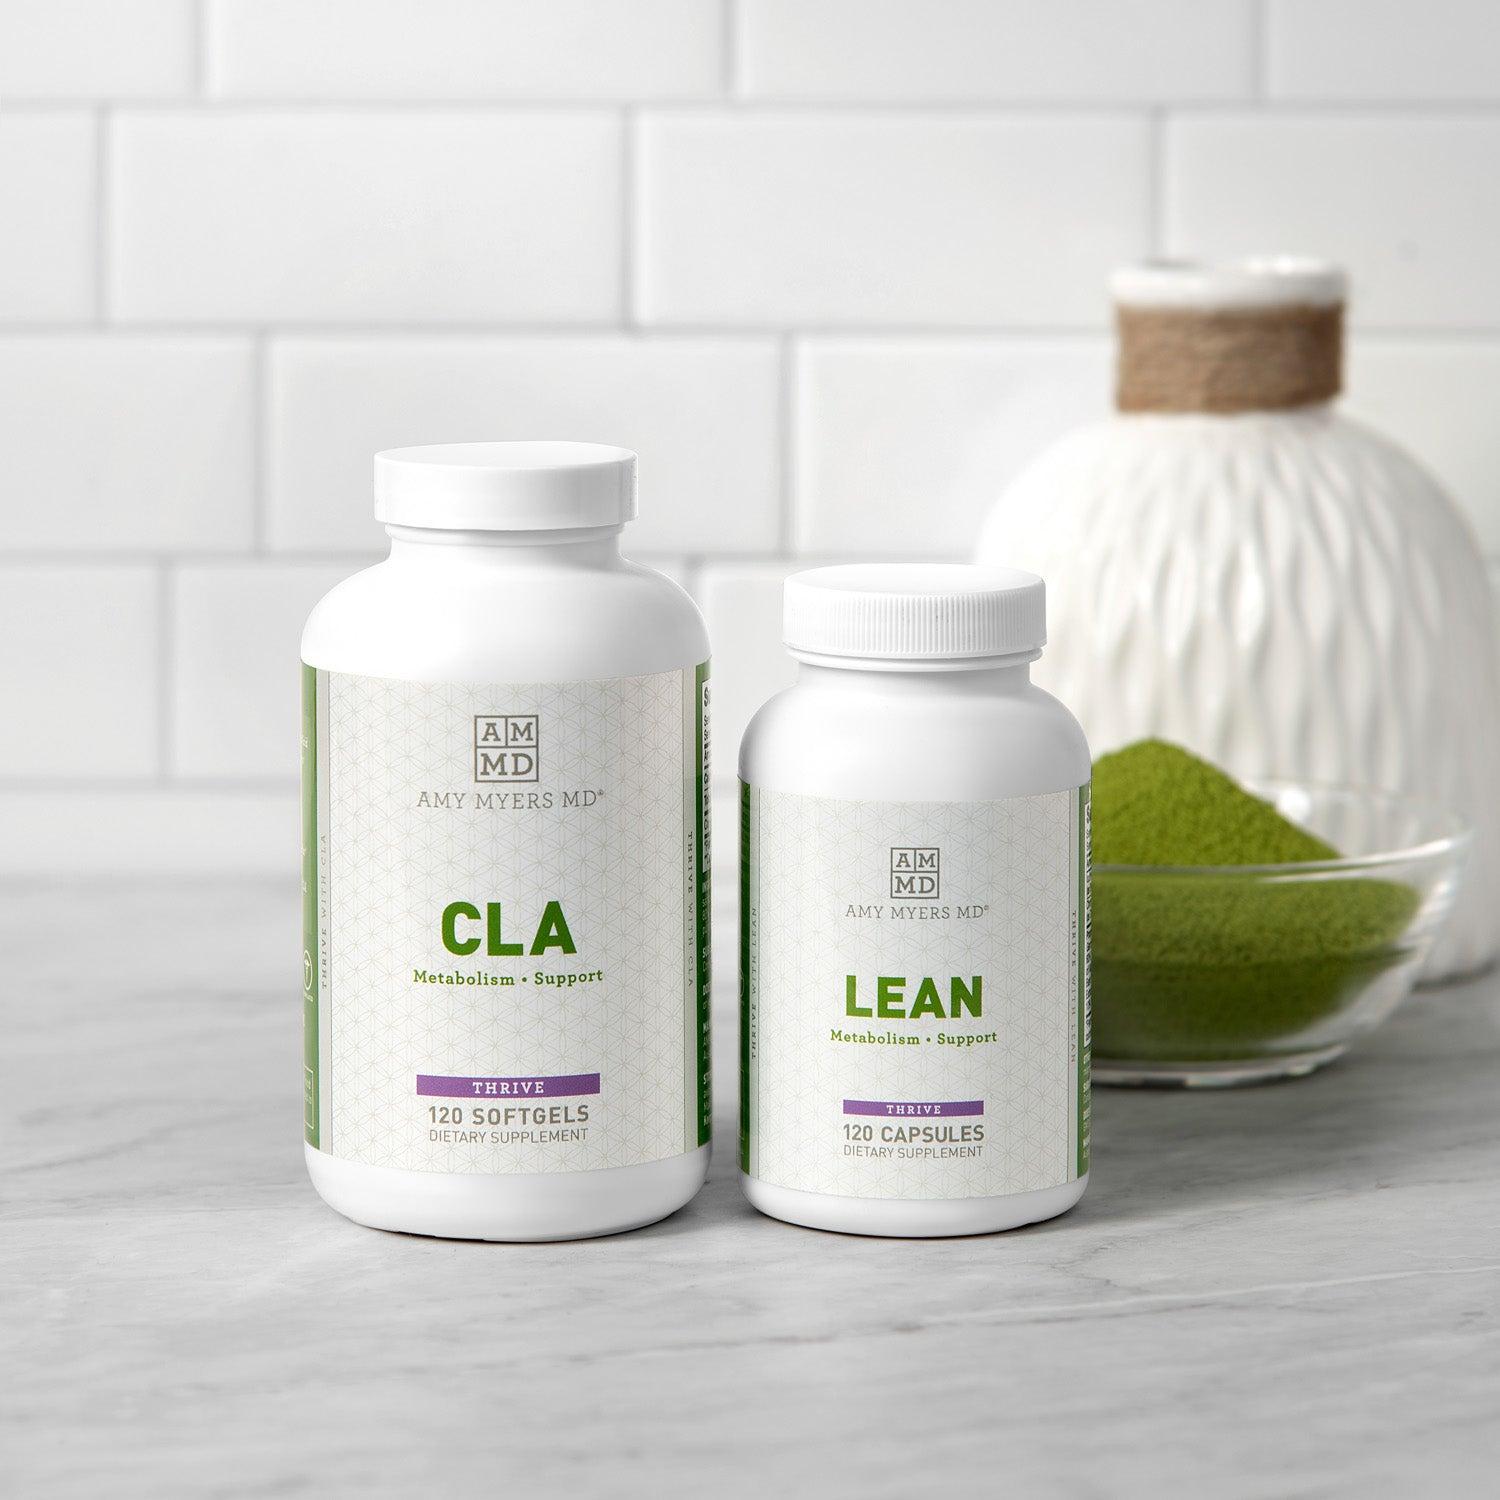 Optimal Weight Support Kit - CLA and Lean Metabolism Support - Featured Image - Amy Myers MD®